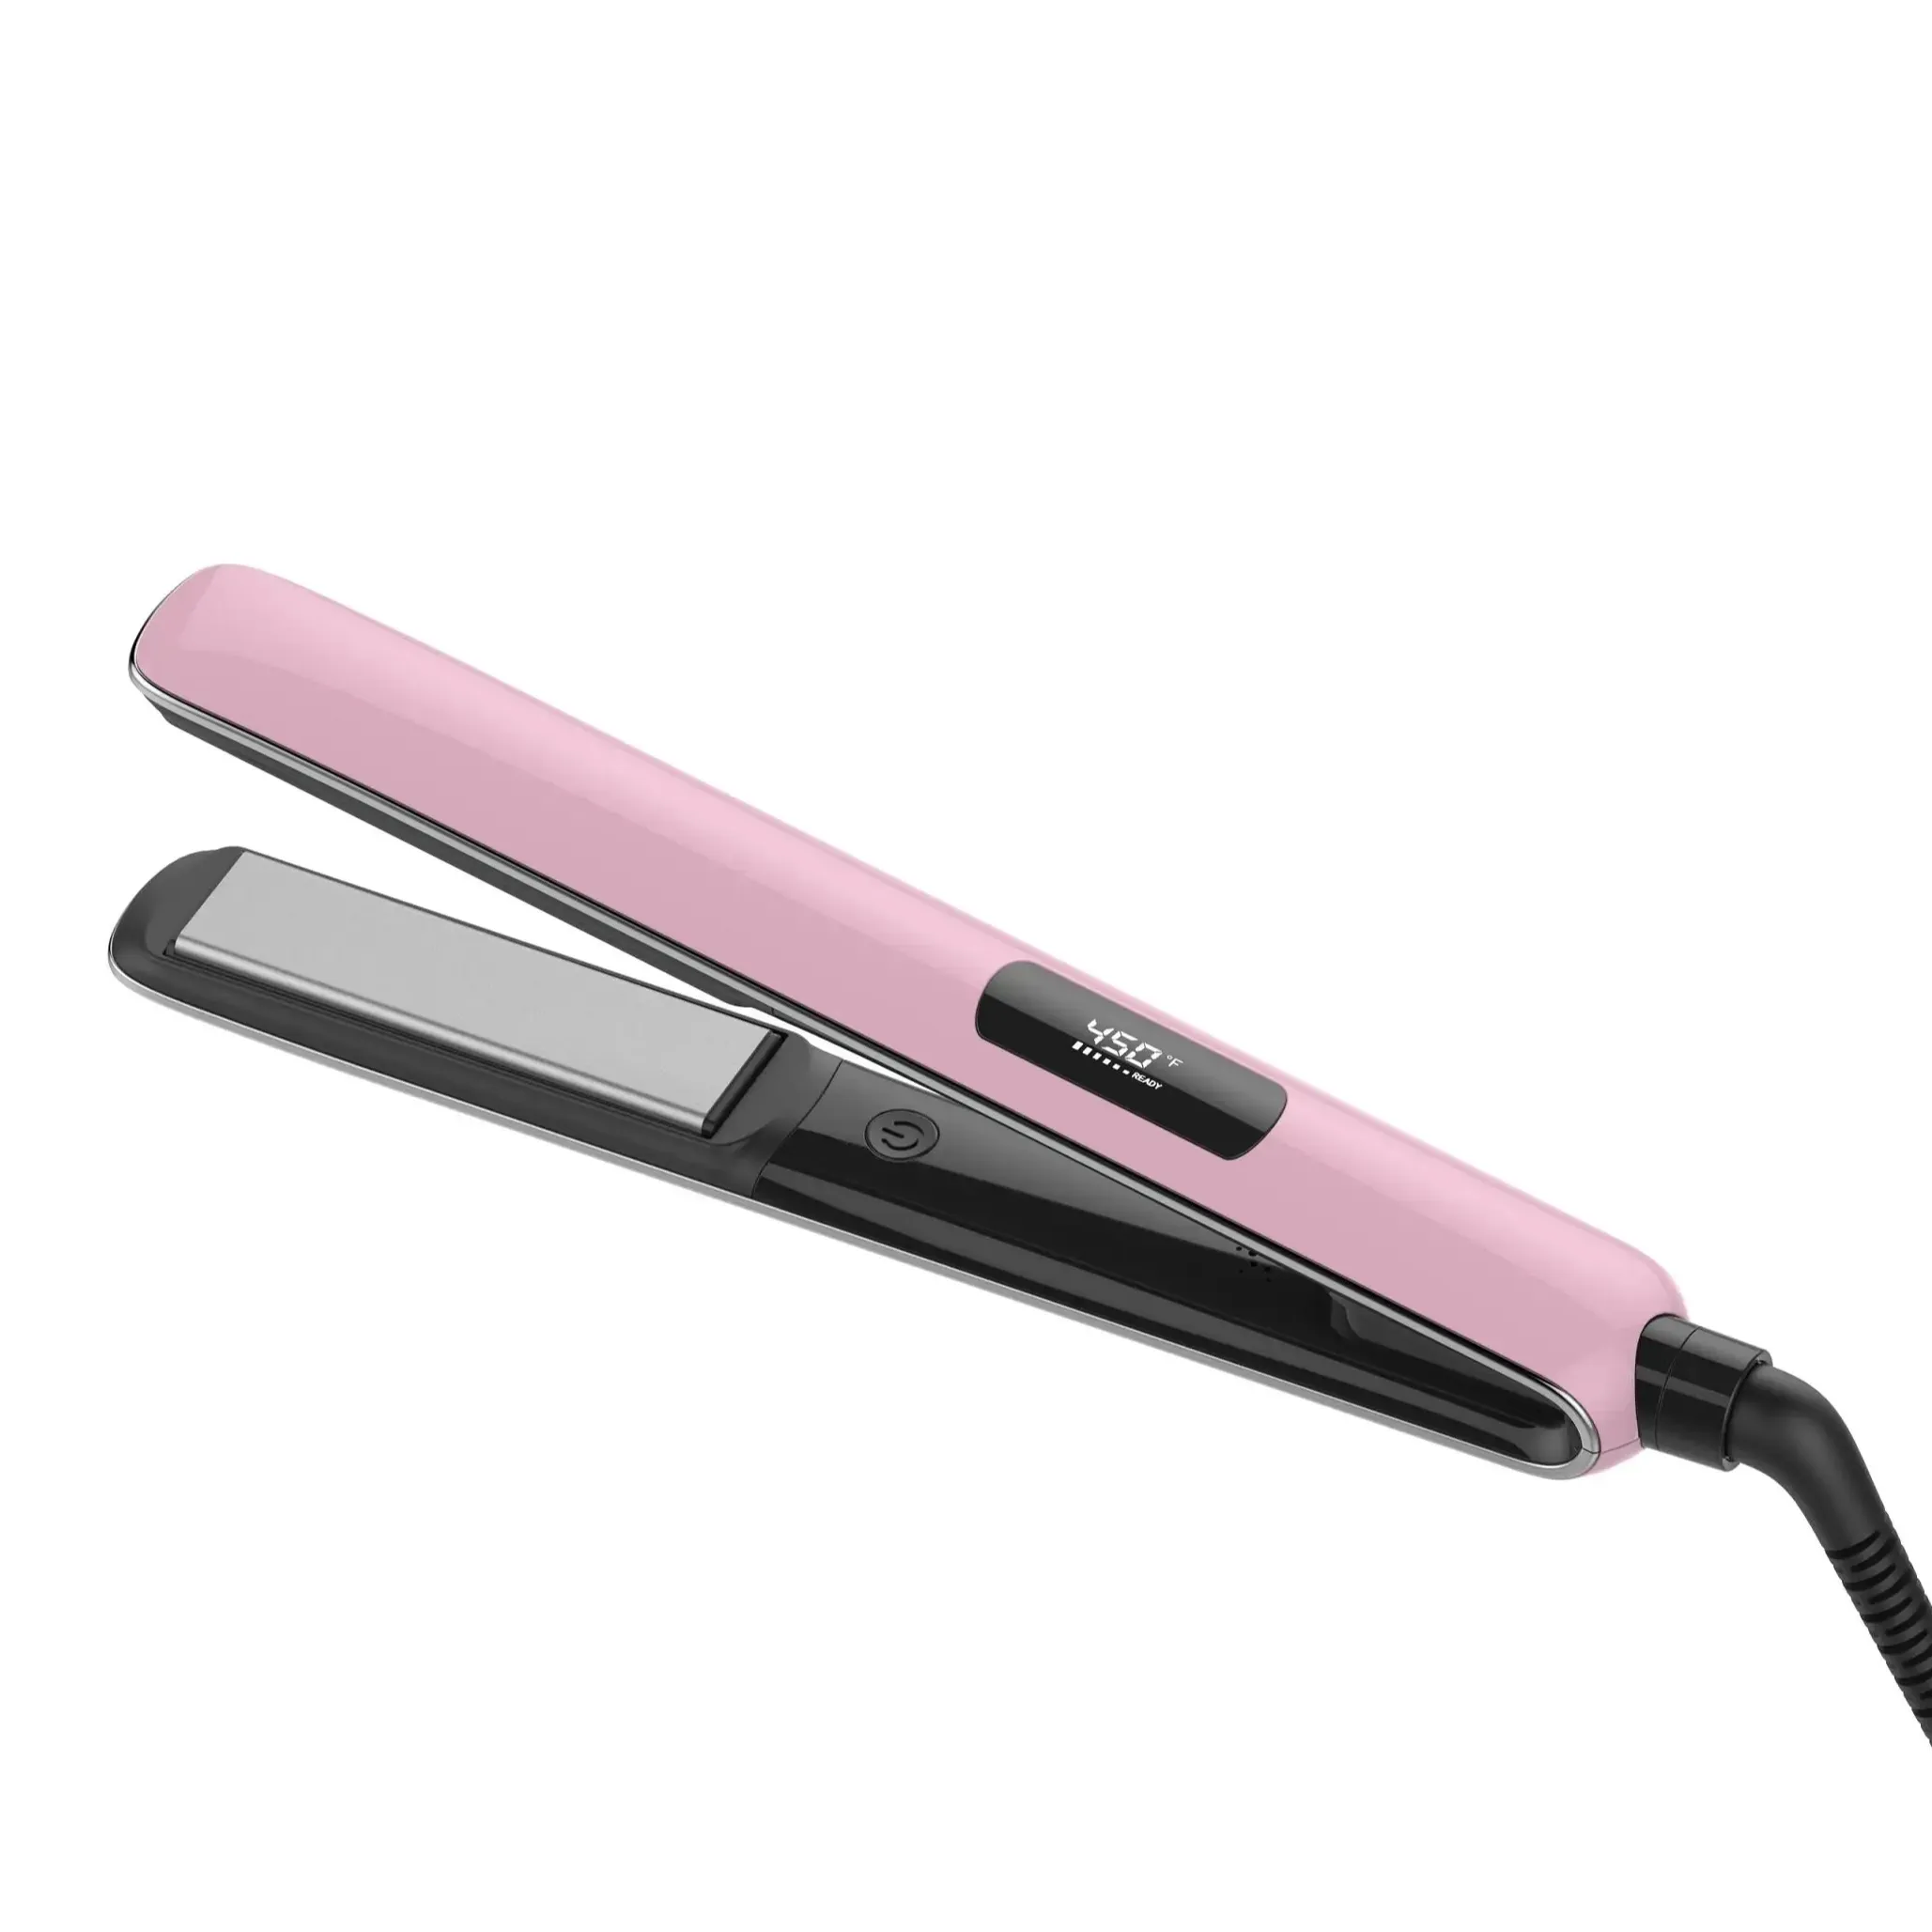 5 in 1 Straight-Curling Ultra-wide temp-adjust professional salon MCH LED 130-150-180-200-230C customize hair straightener